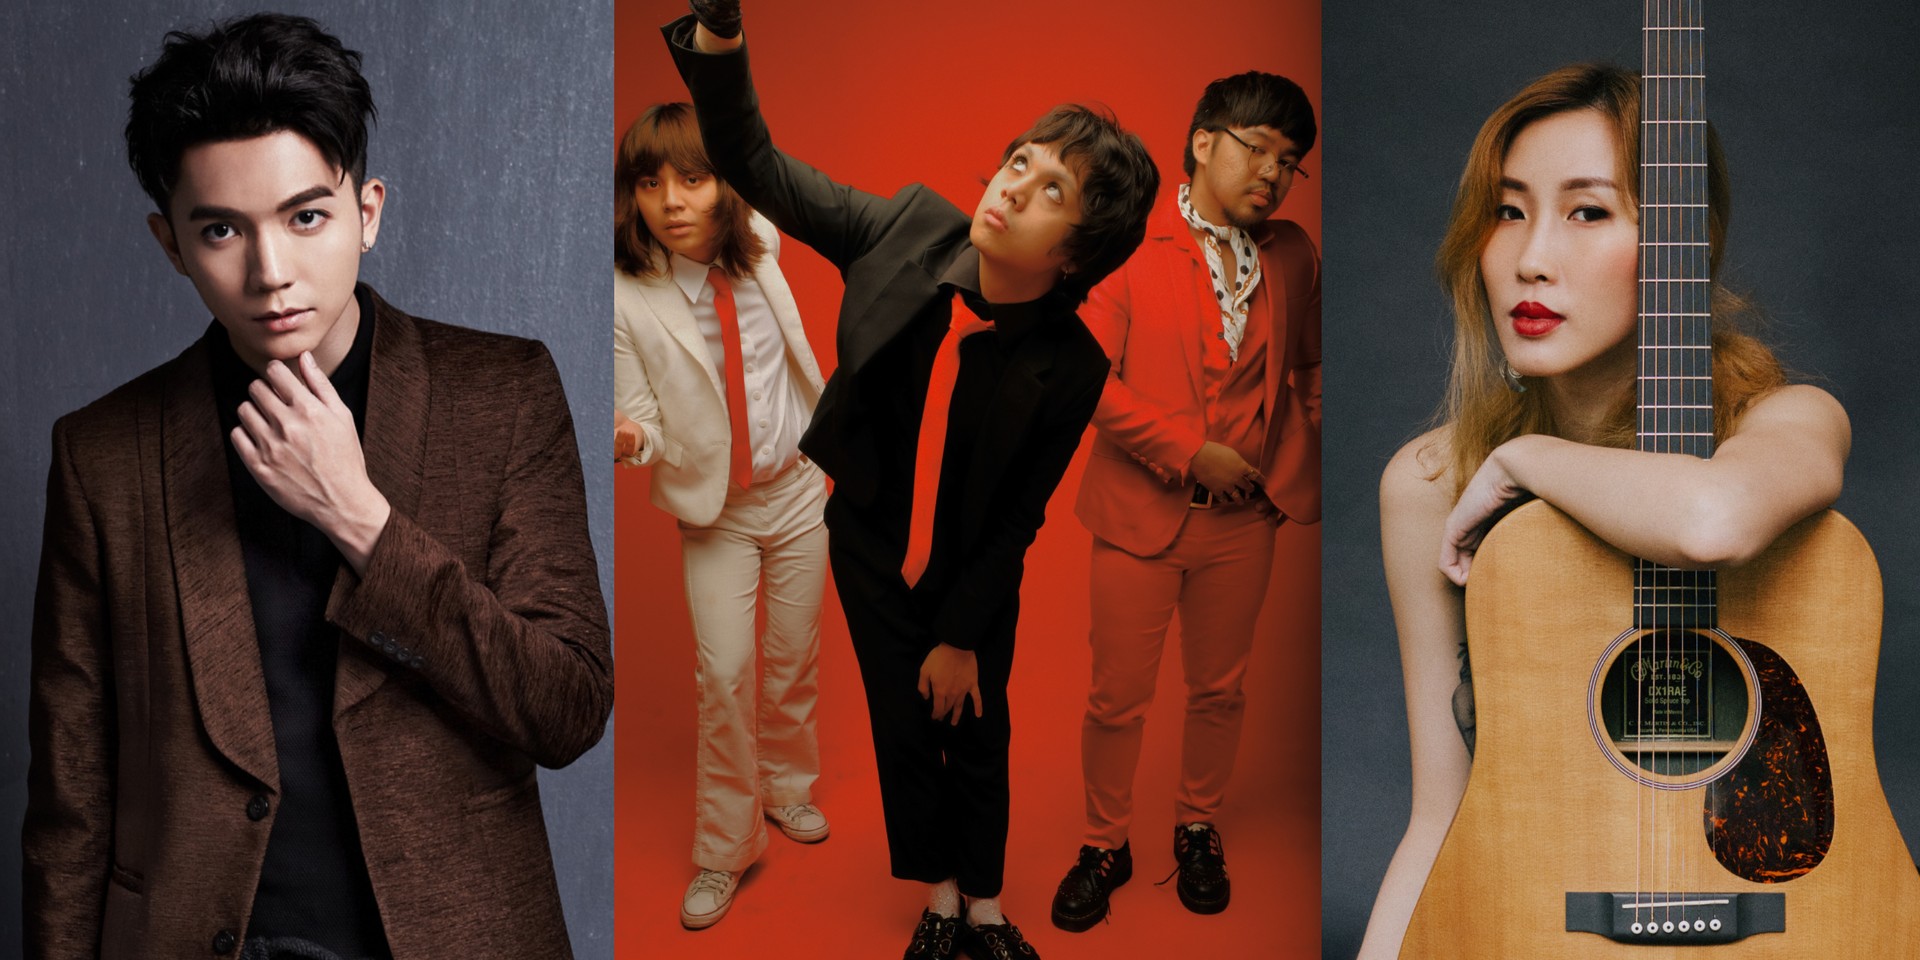 IV of Spades, Haoren and Adia Tay to perform at Marina Bay Sands' Open Stage this July